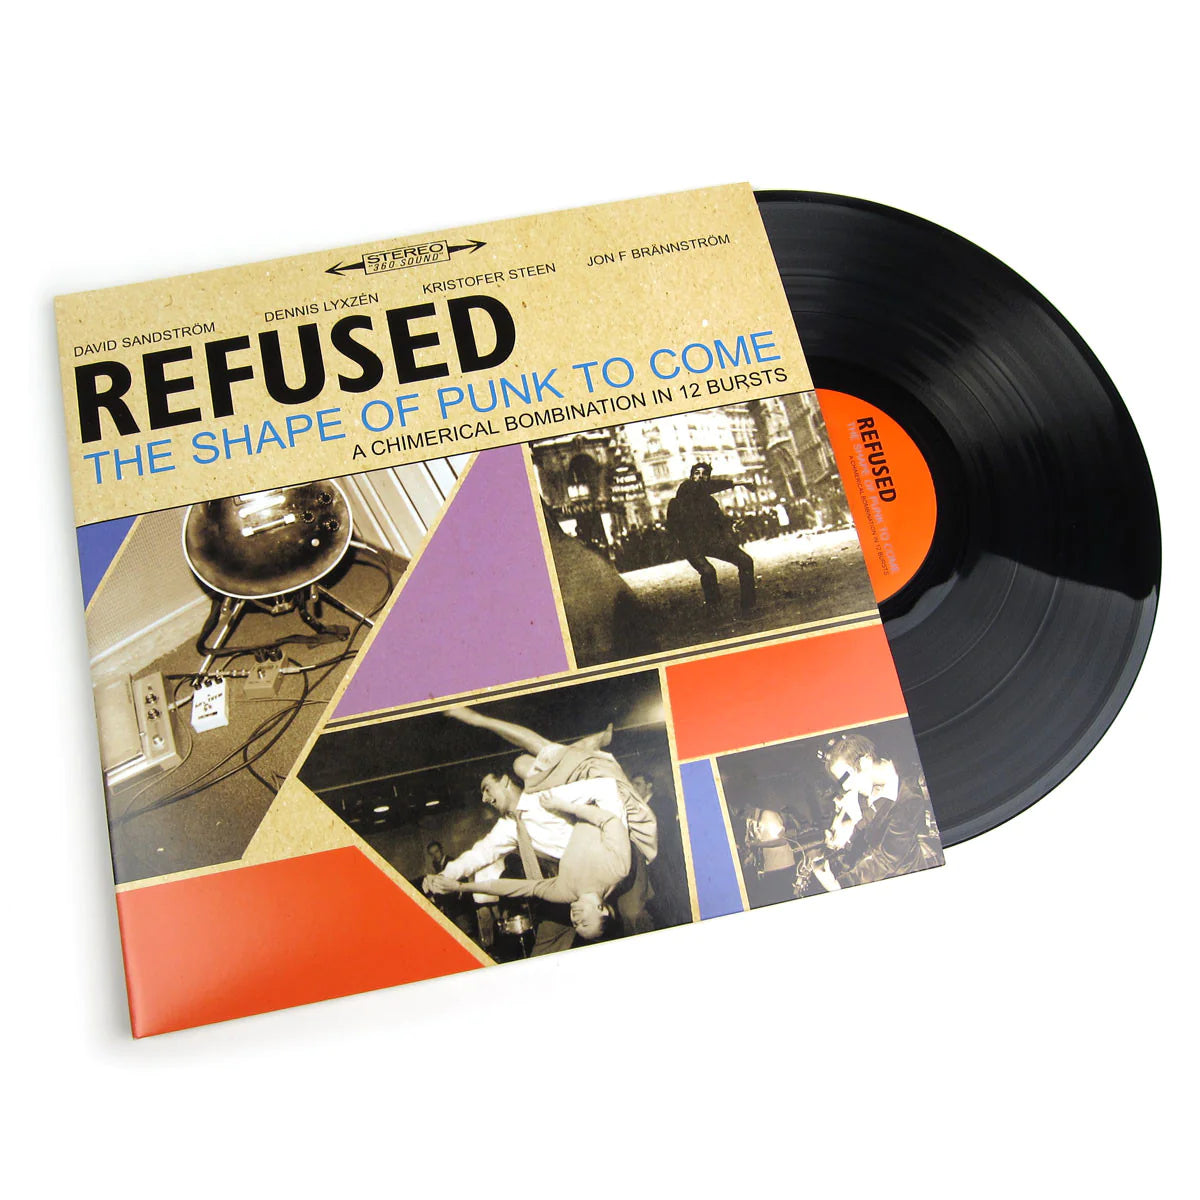 Refused - The Shape of Punk to Come (Double Black Vinyl)